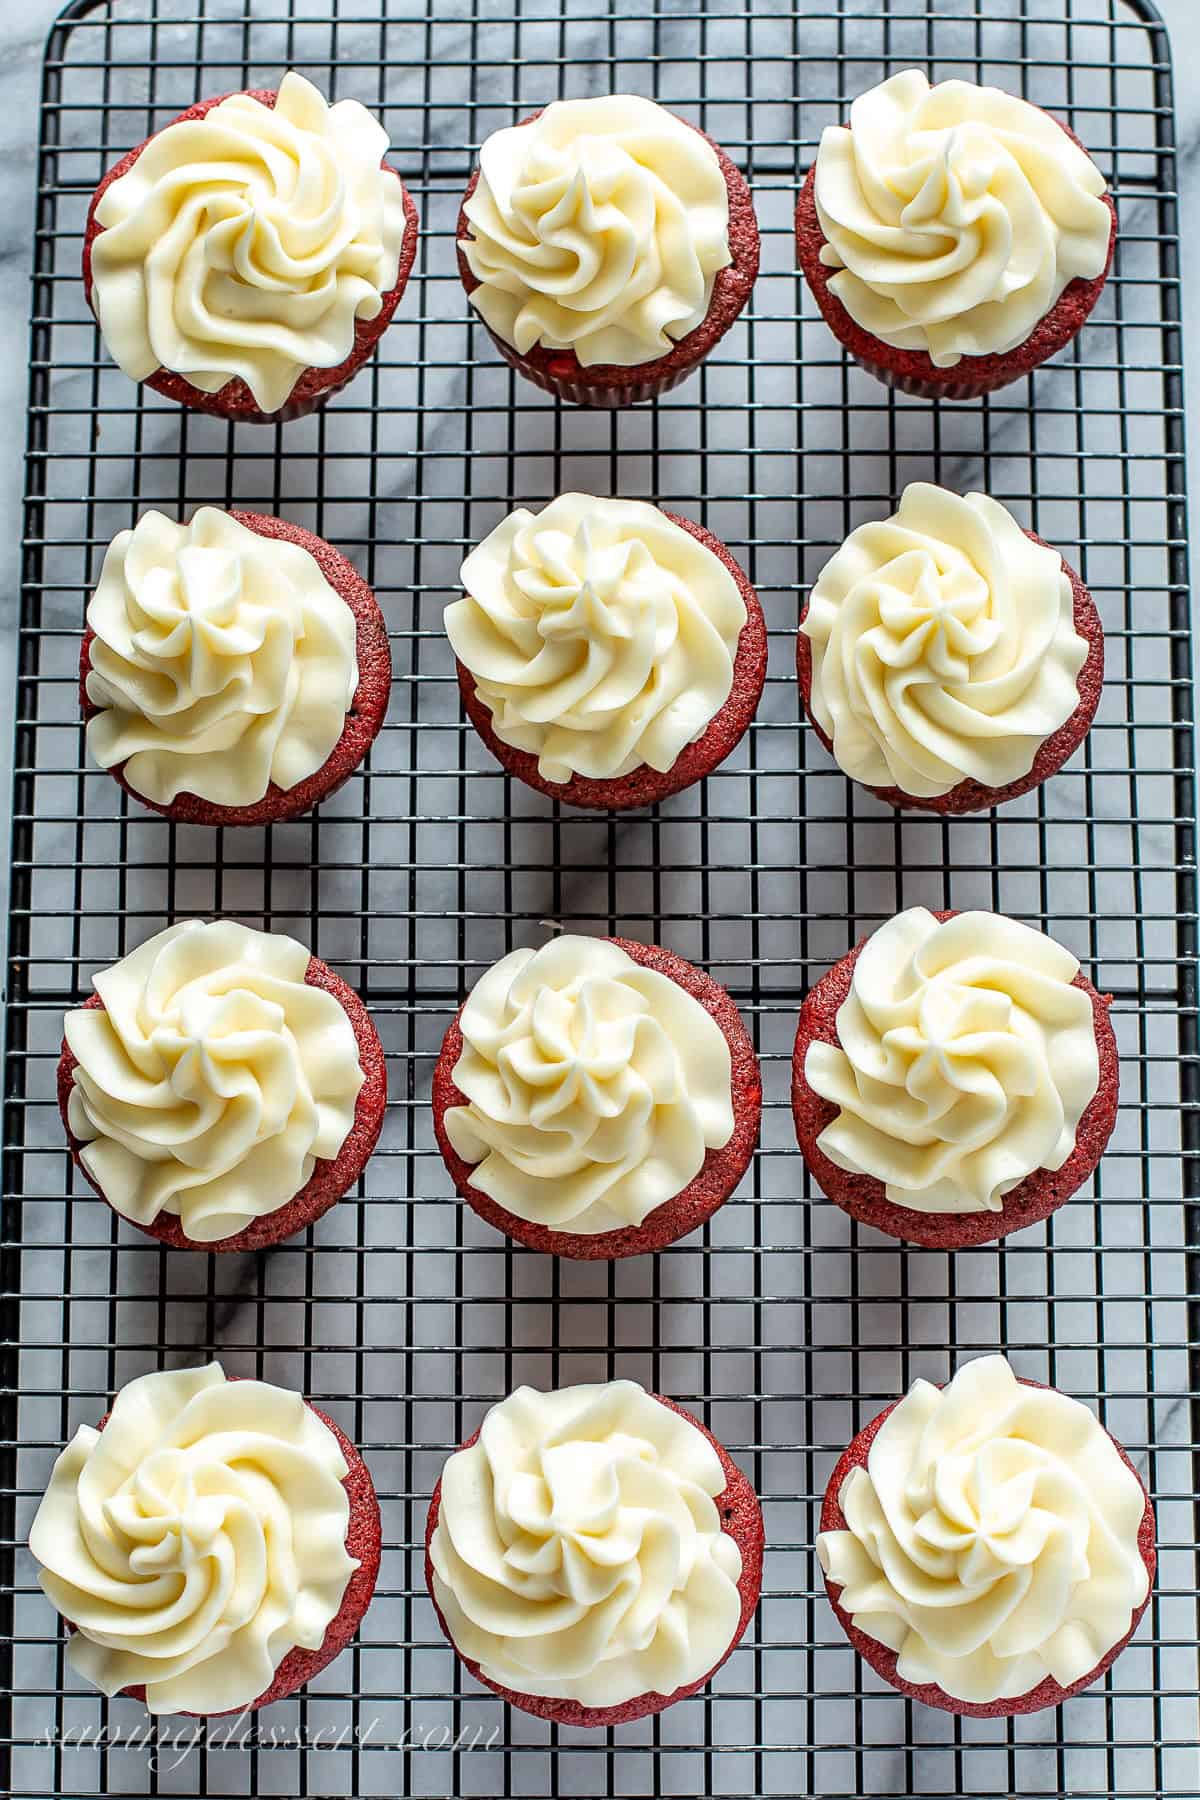 An overhead view of a dozen frosted red velvet cupcakes